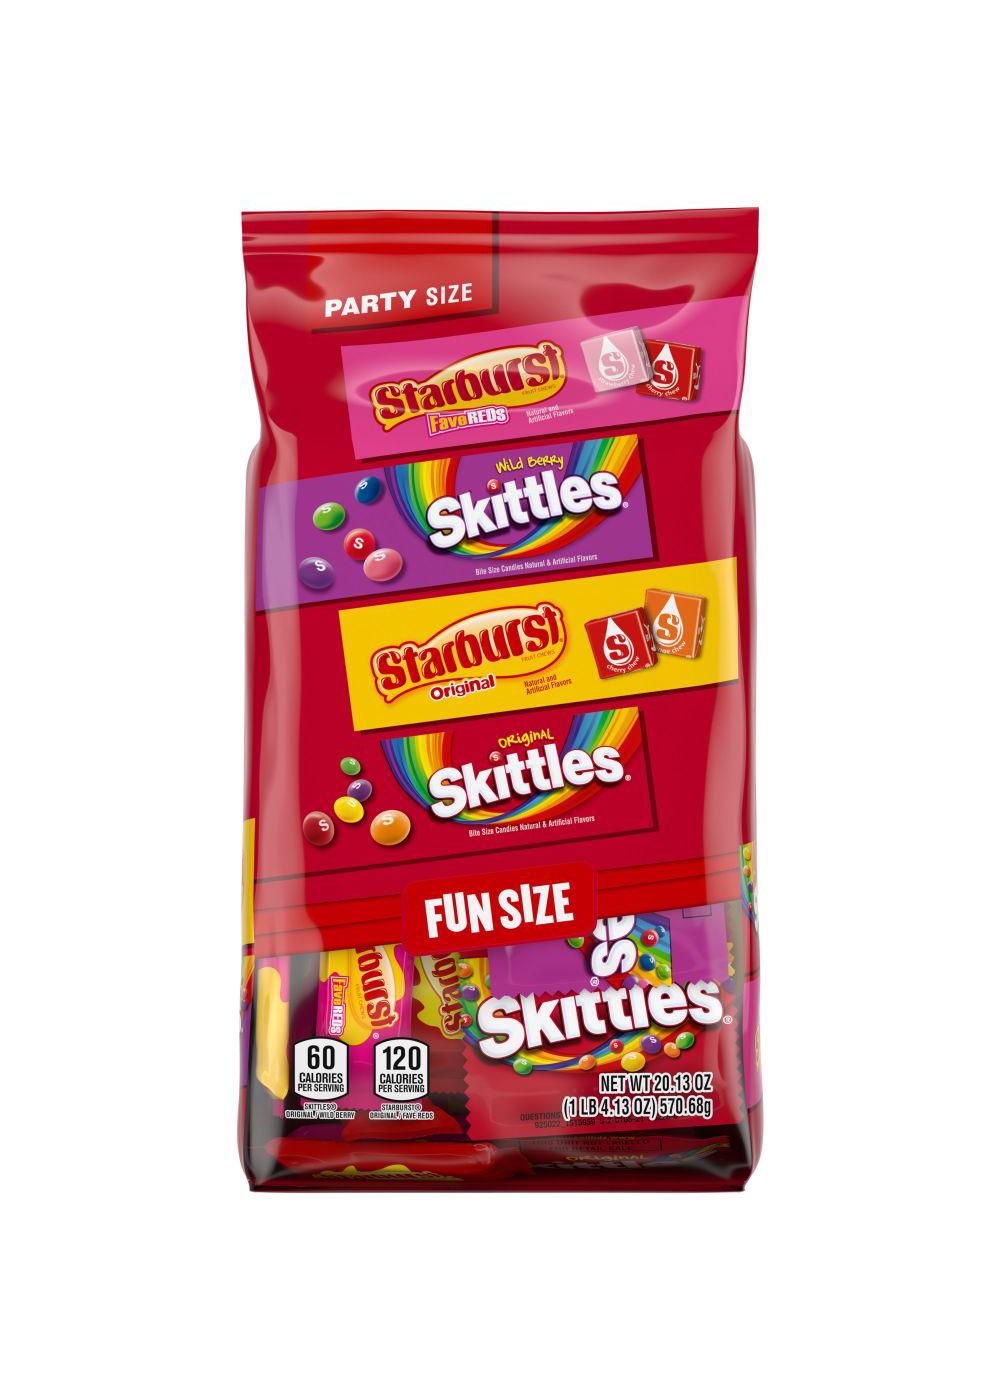 Skittles & Starburst Assorted Fun Size Candy - Party Size; image 1 of 6